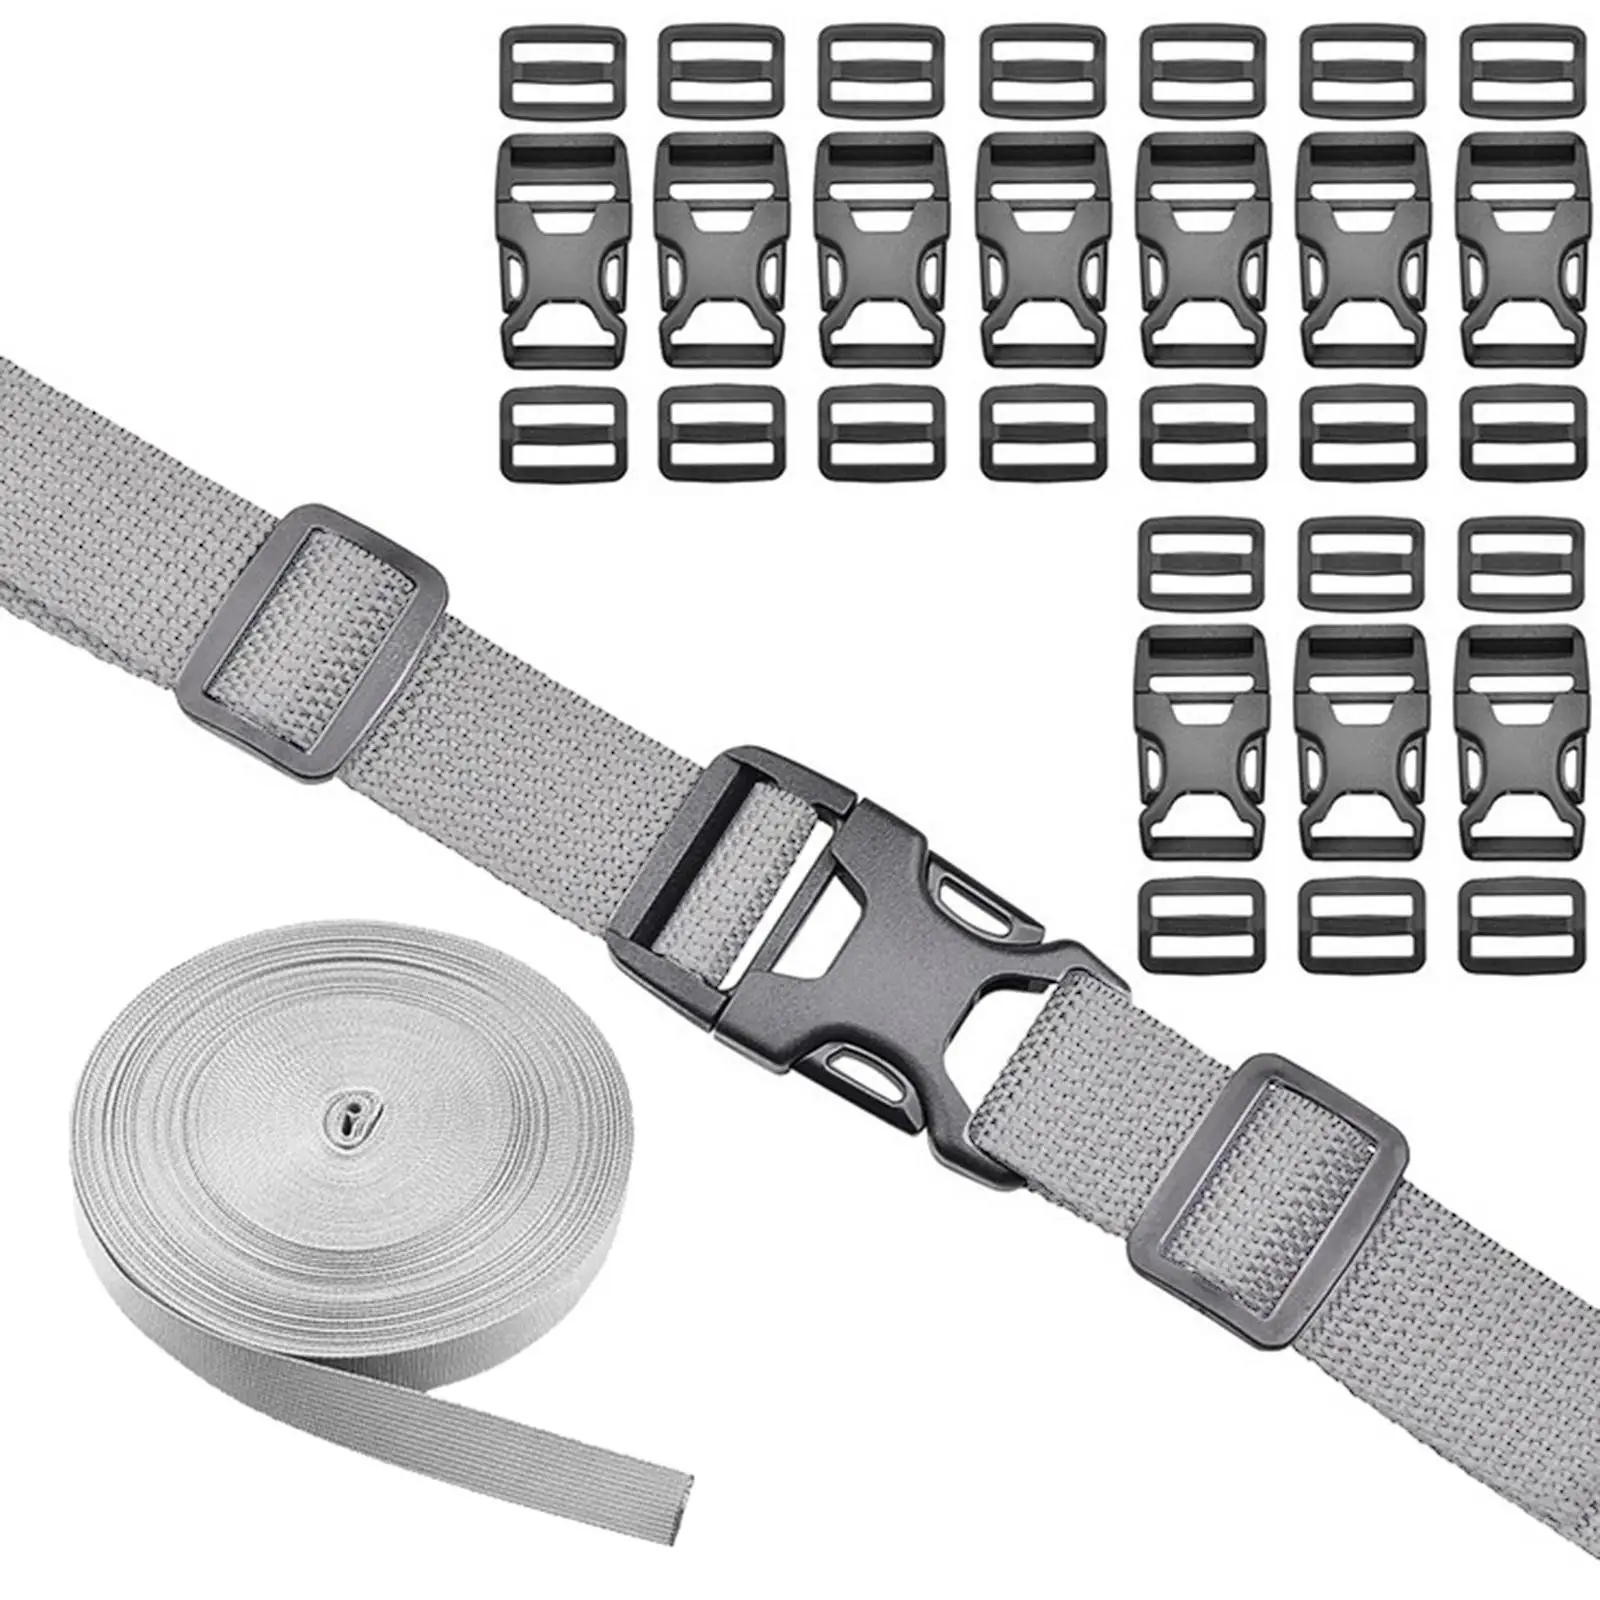 Lashing Strap, Buckle tie Straps Heavy Duty for , Luggage, Bicycle, Camping Hiking Suitcase Luggage Lashing Straps